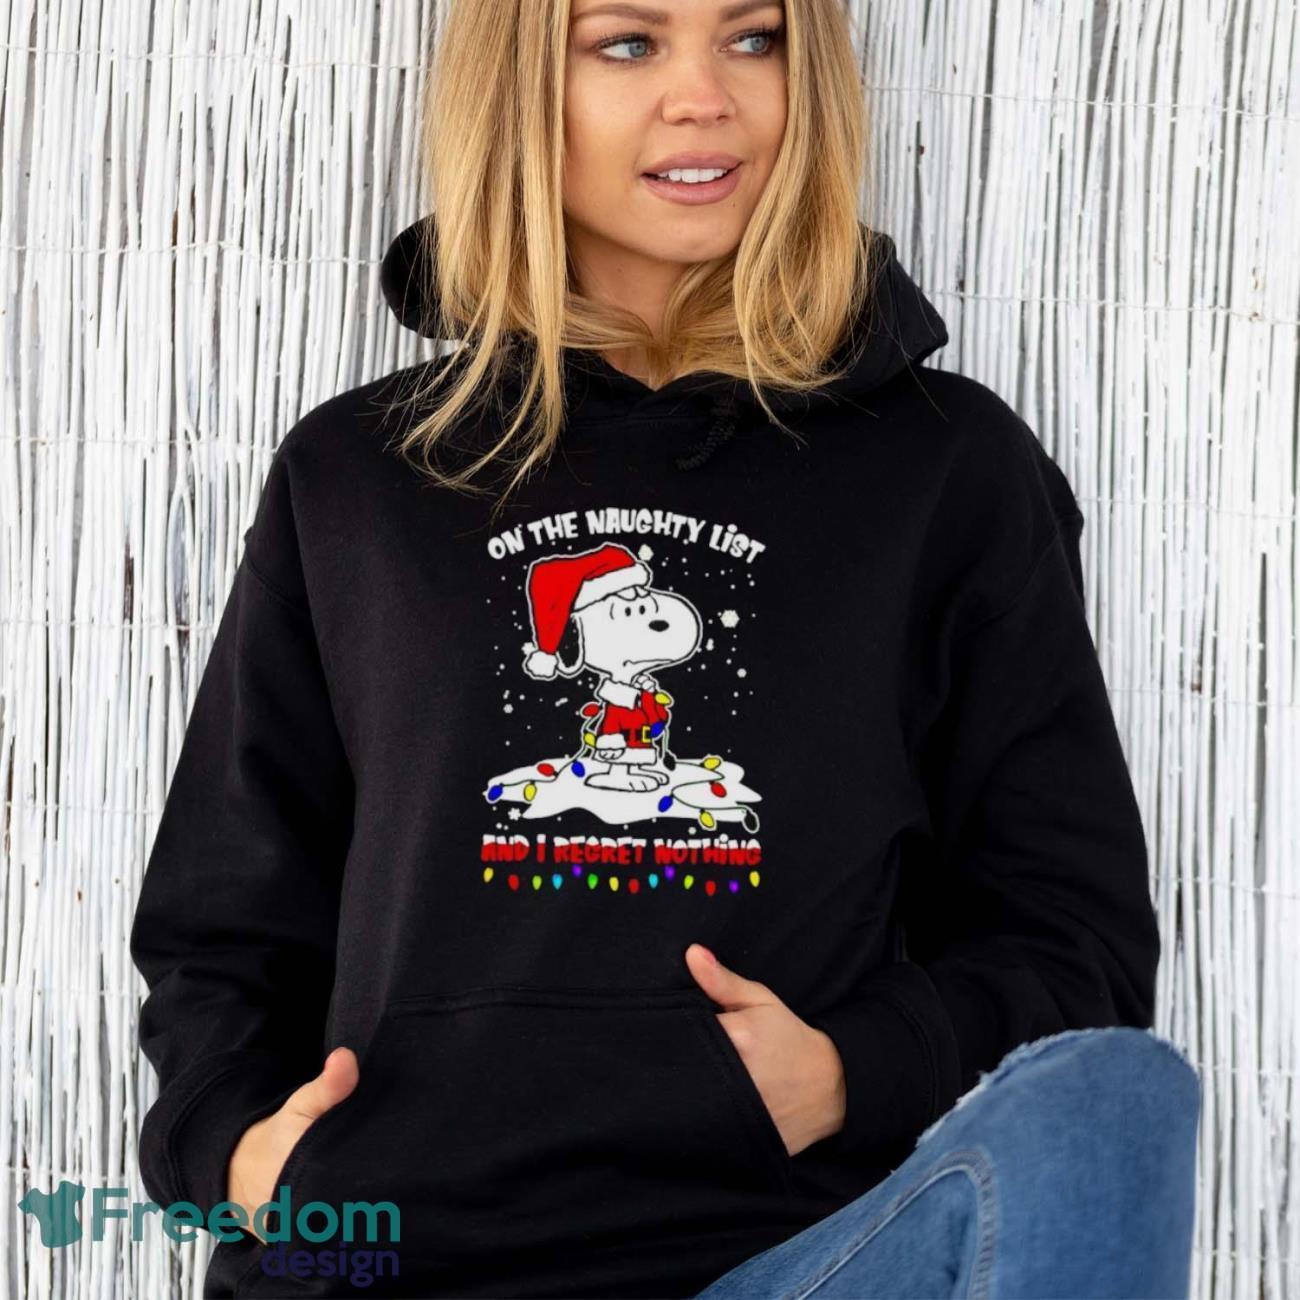 Snoopy and Friends Merry Toronto Blue Jays Christmas shirt